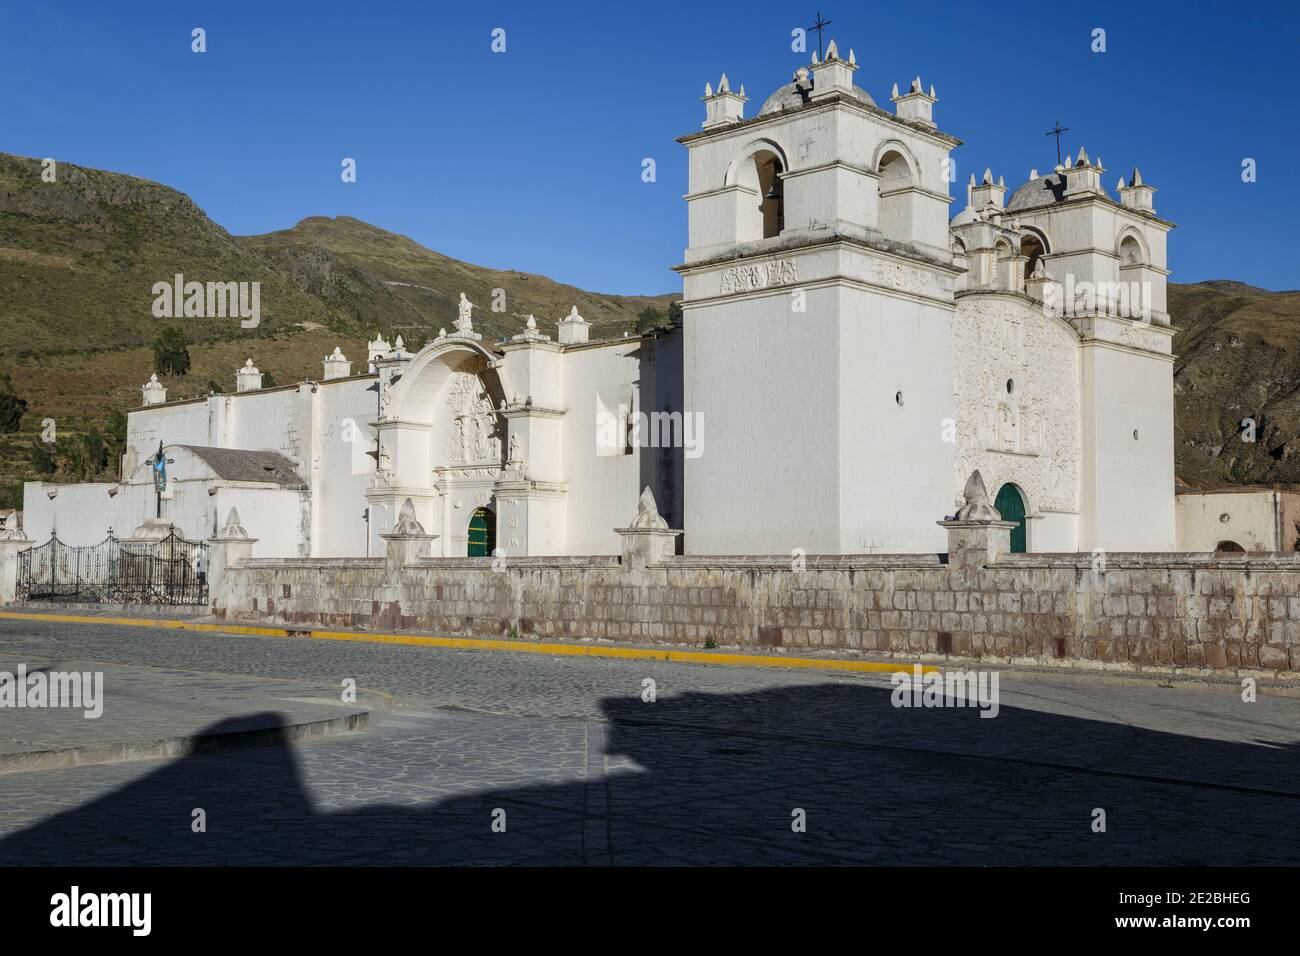 Immaculate Conception Church, Yanque, Colca Canyon, Arequipa, Peru Stock Photo